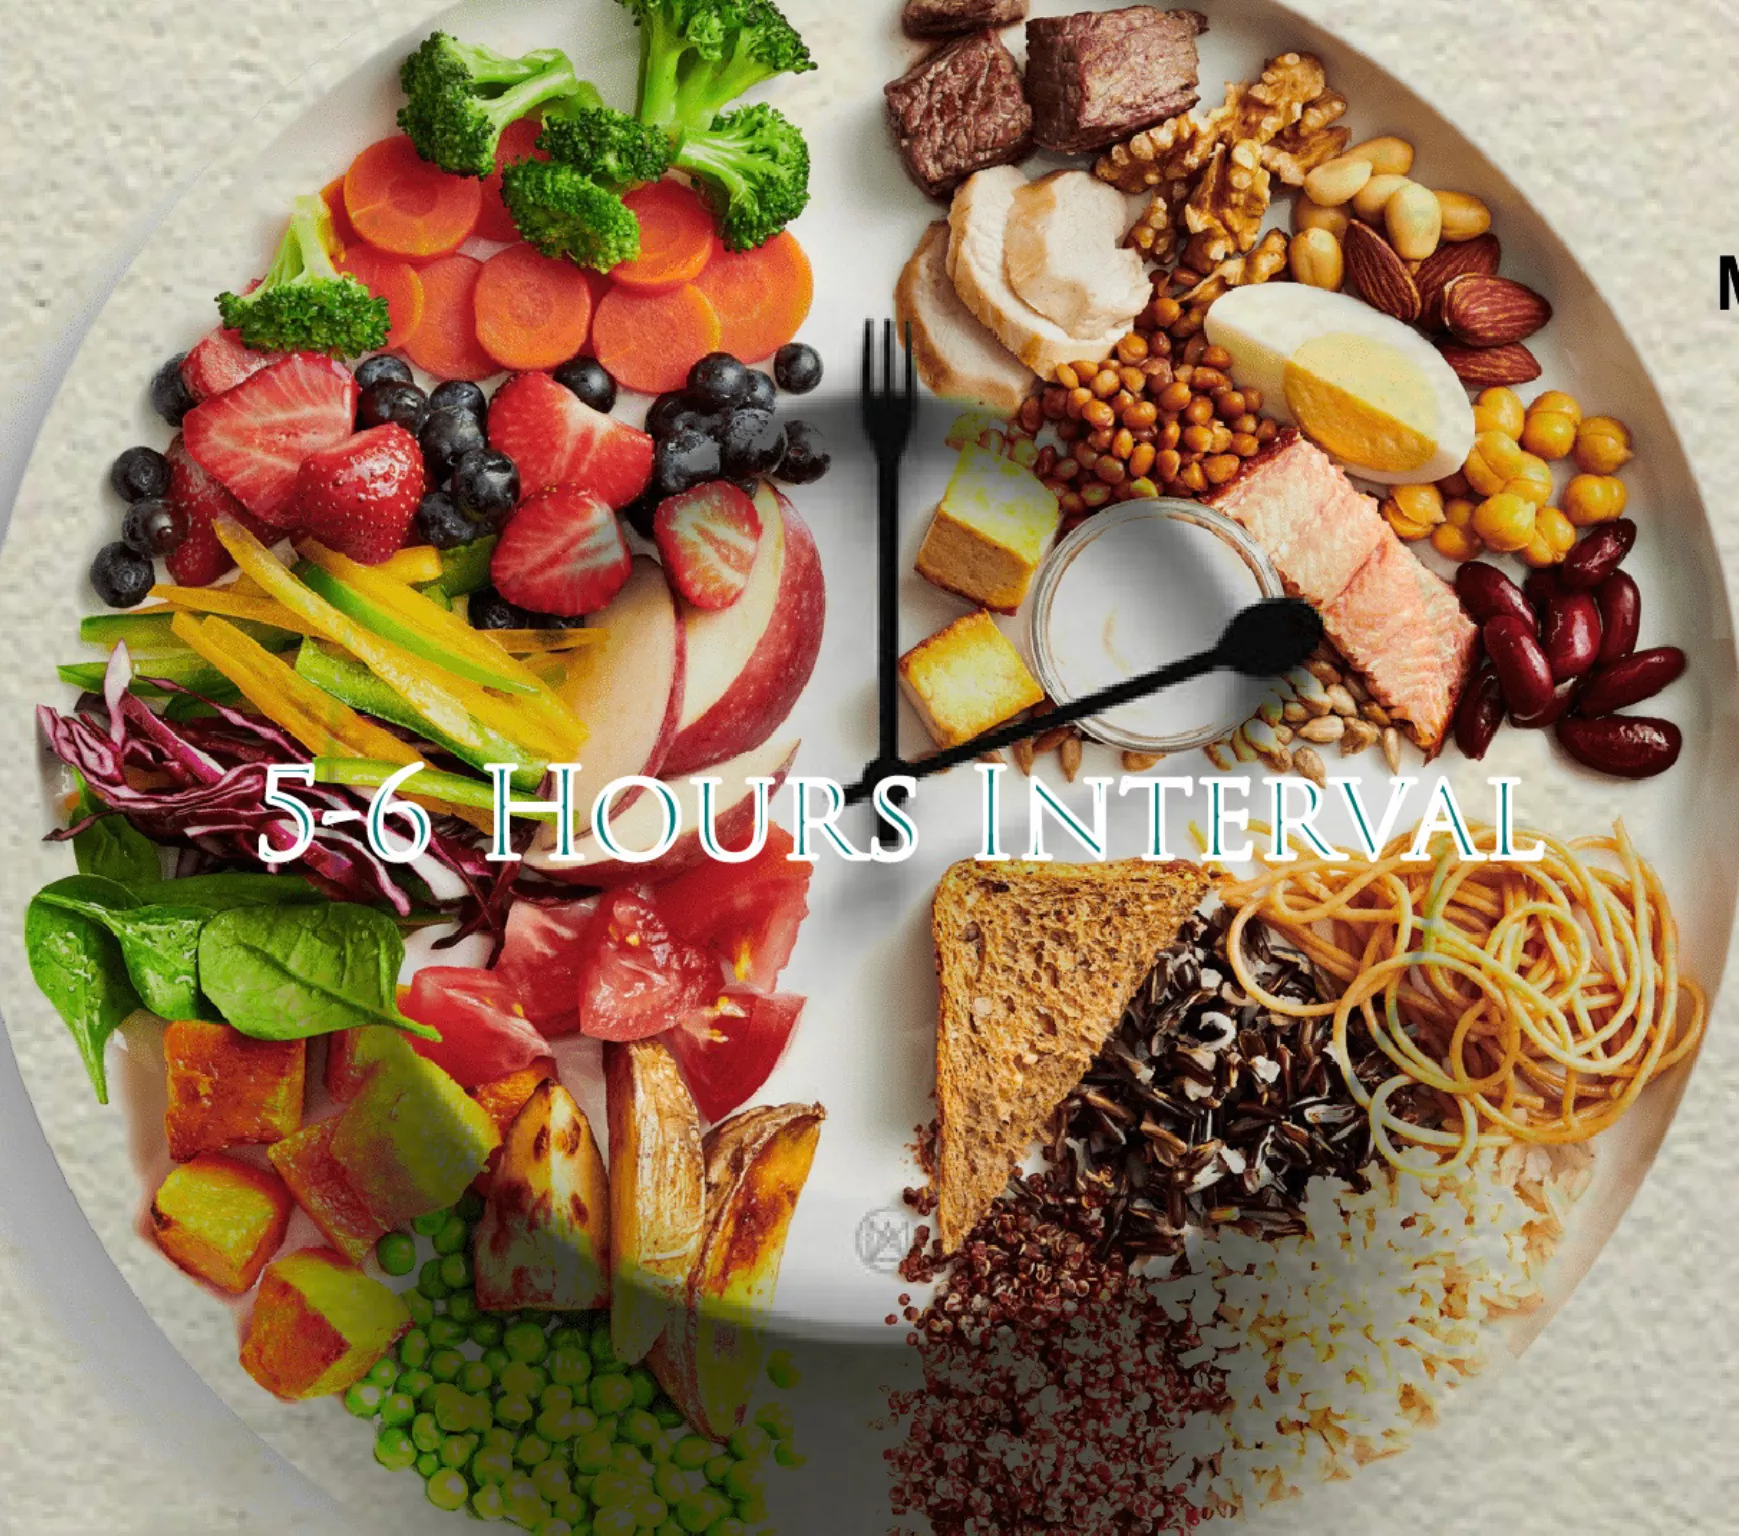 Conscious Eating- Give an interval of 5-6 hours between meal